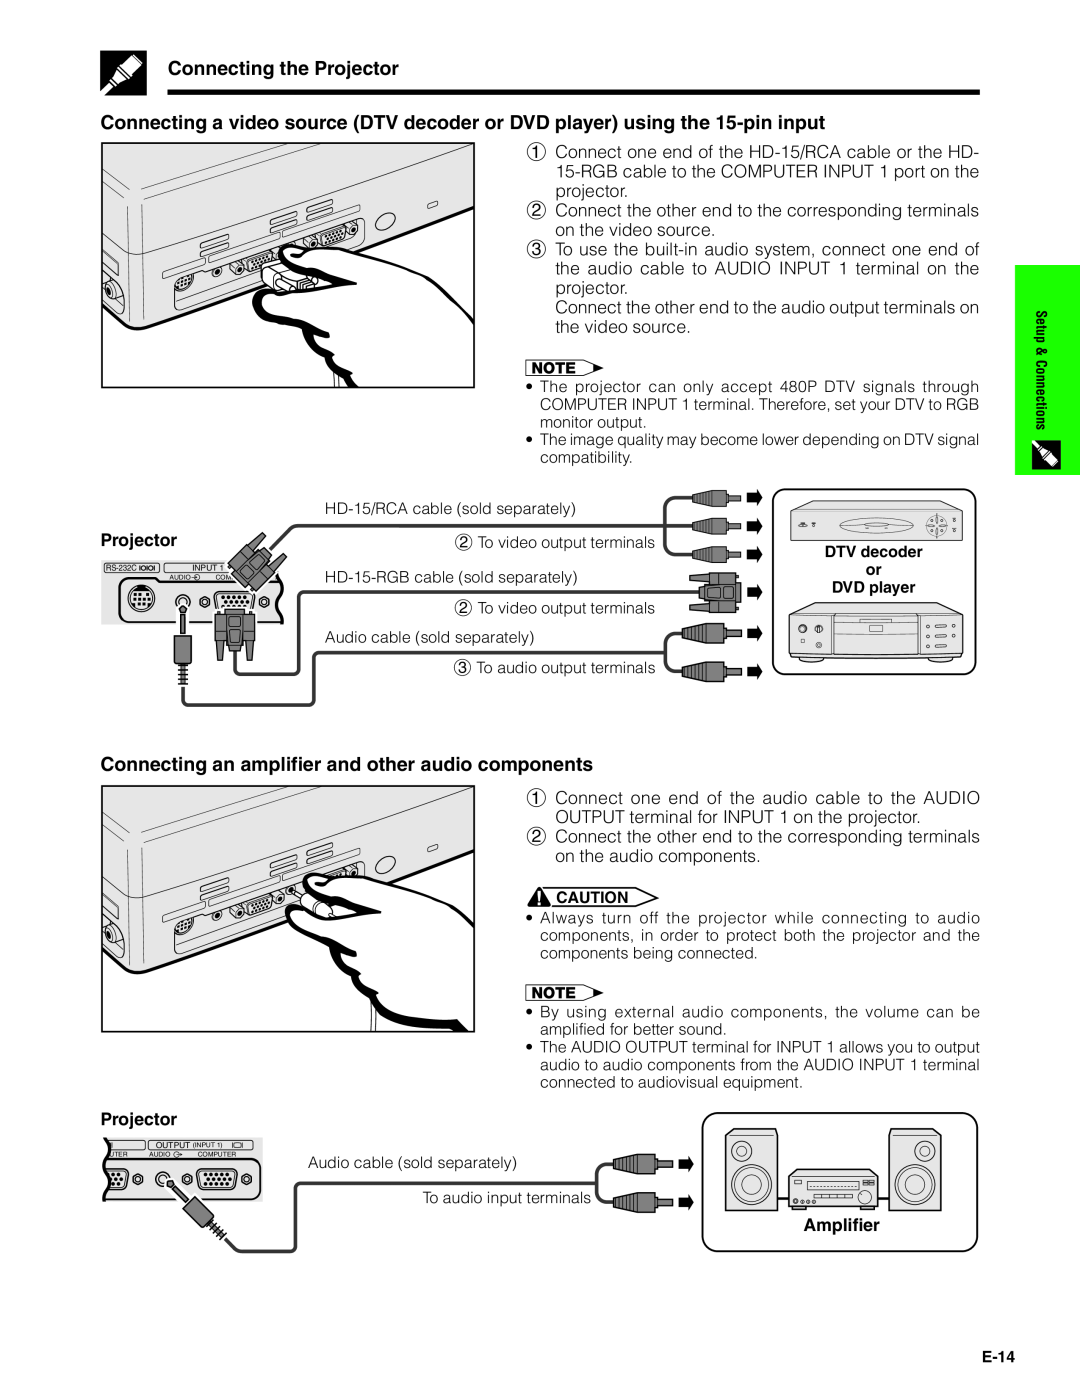 Sharp PG-C20XU operation manual Connecting the Projector, Connecting an amplifier and other audio components, Amplifier 